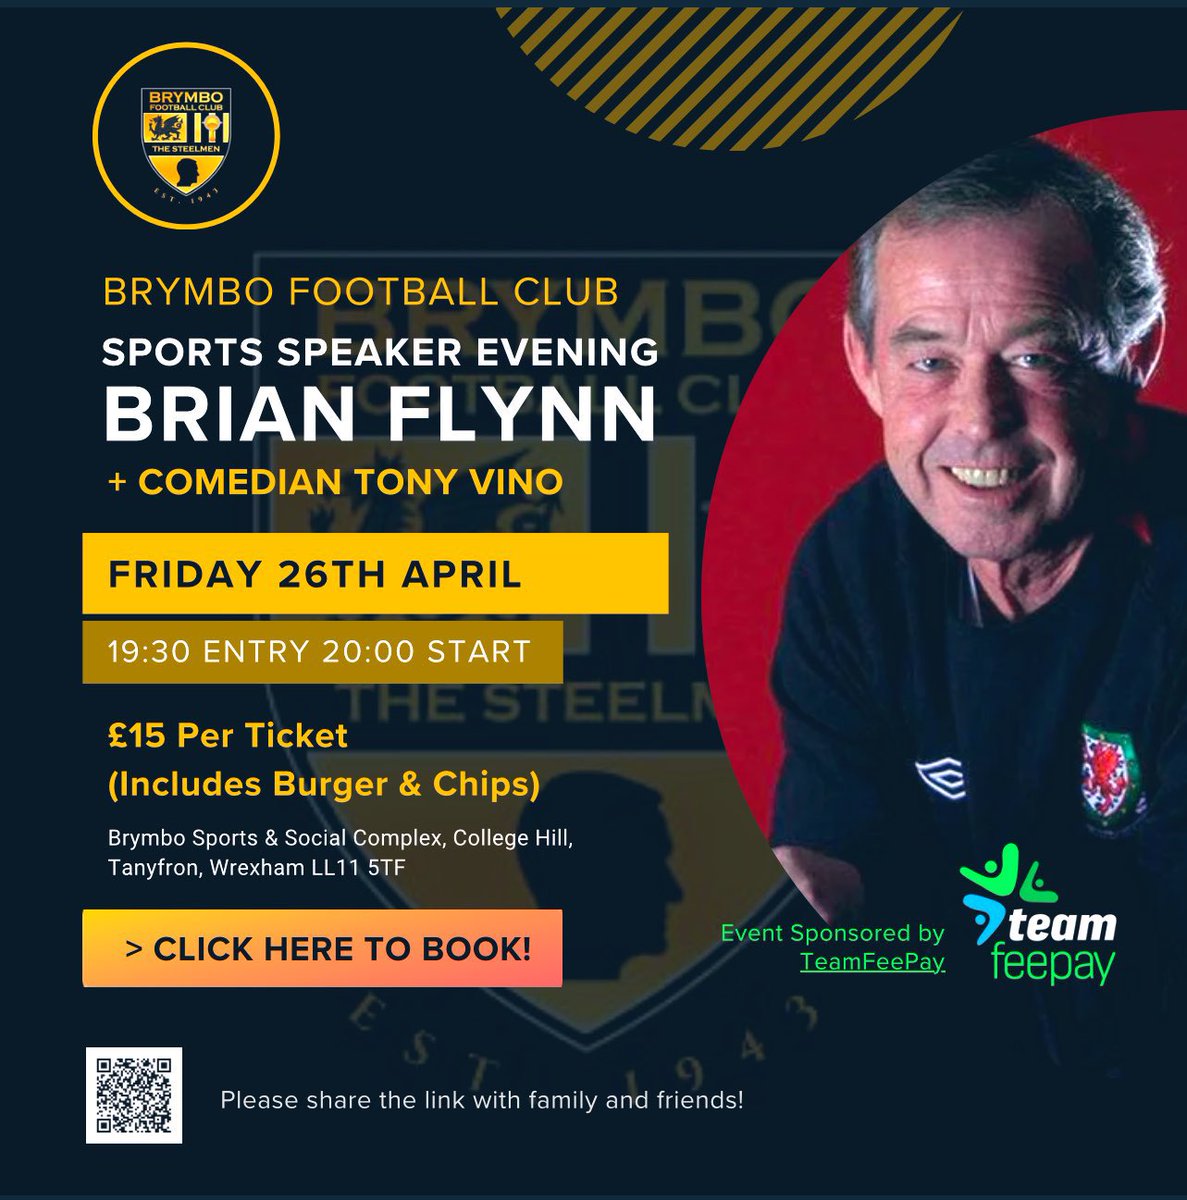 Join us for a brilliant night with Brian Flynn to hear about his @FAWales @Wrexham_AFC stories. With comedy from @tonyvino Event sponsored by @teamfeepay Tickets app.teamfeepay.com/brymbo-footbal…